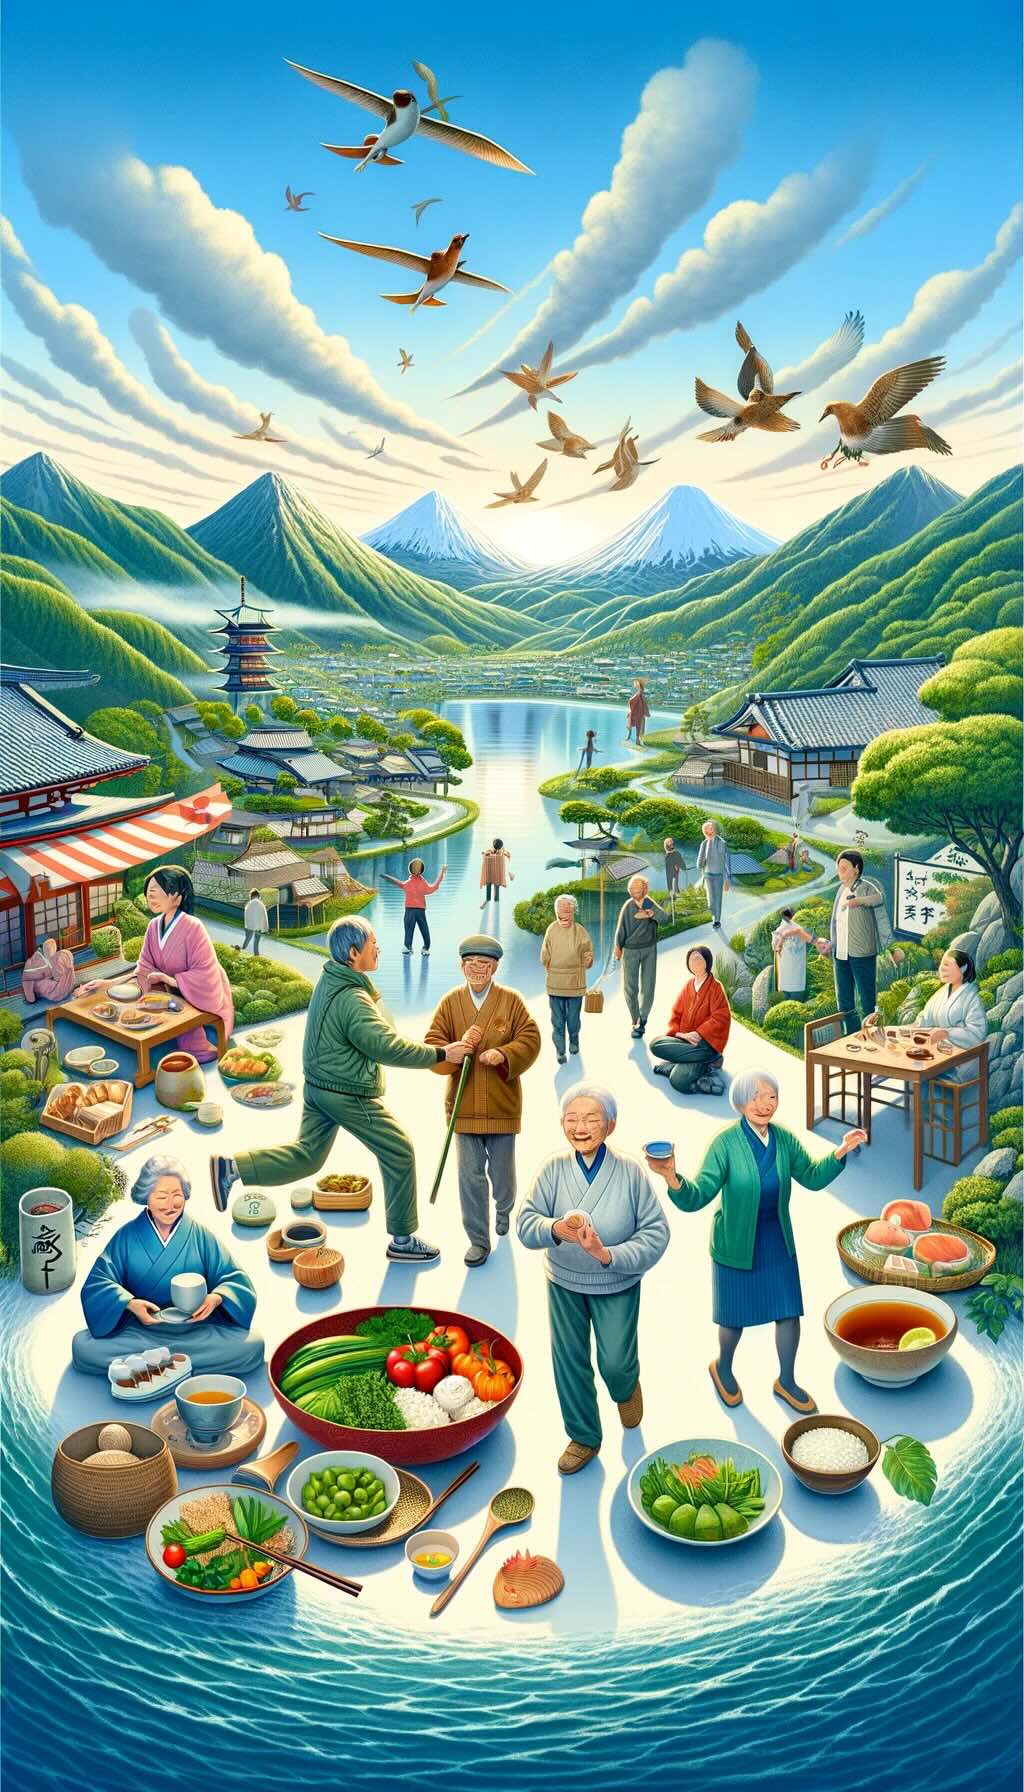 Secrets of Japan's longest-living locals, incorporating elements of their diet, active lifestyle, social engagement, harmony with nature, and traditional healthcare practices.